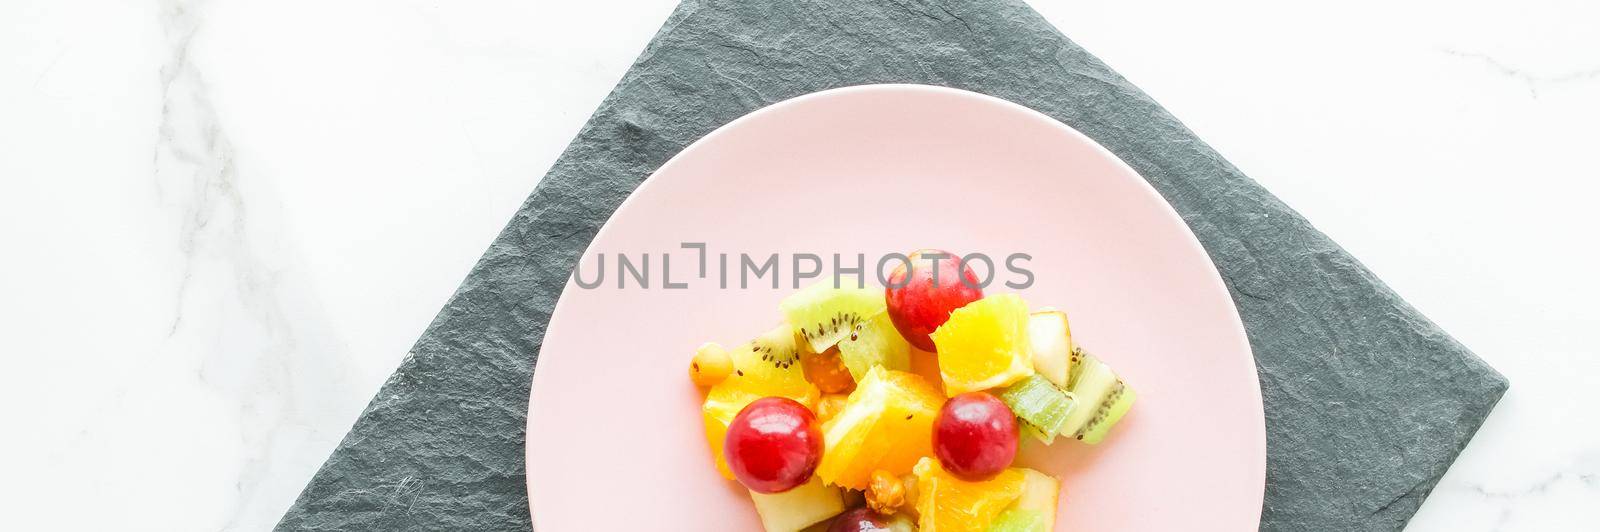 juicy fruit salad for breakfast on marble, flatlay - dieting and healthy lifestyle concept by Anneleven